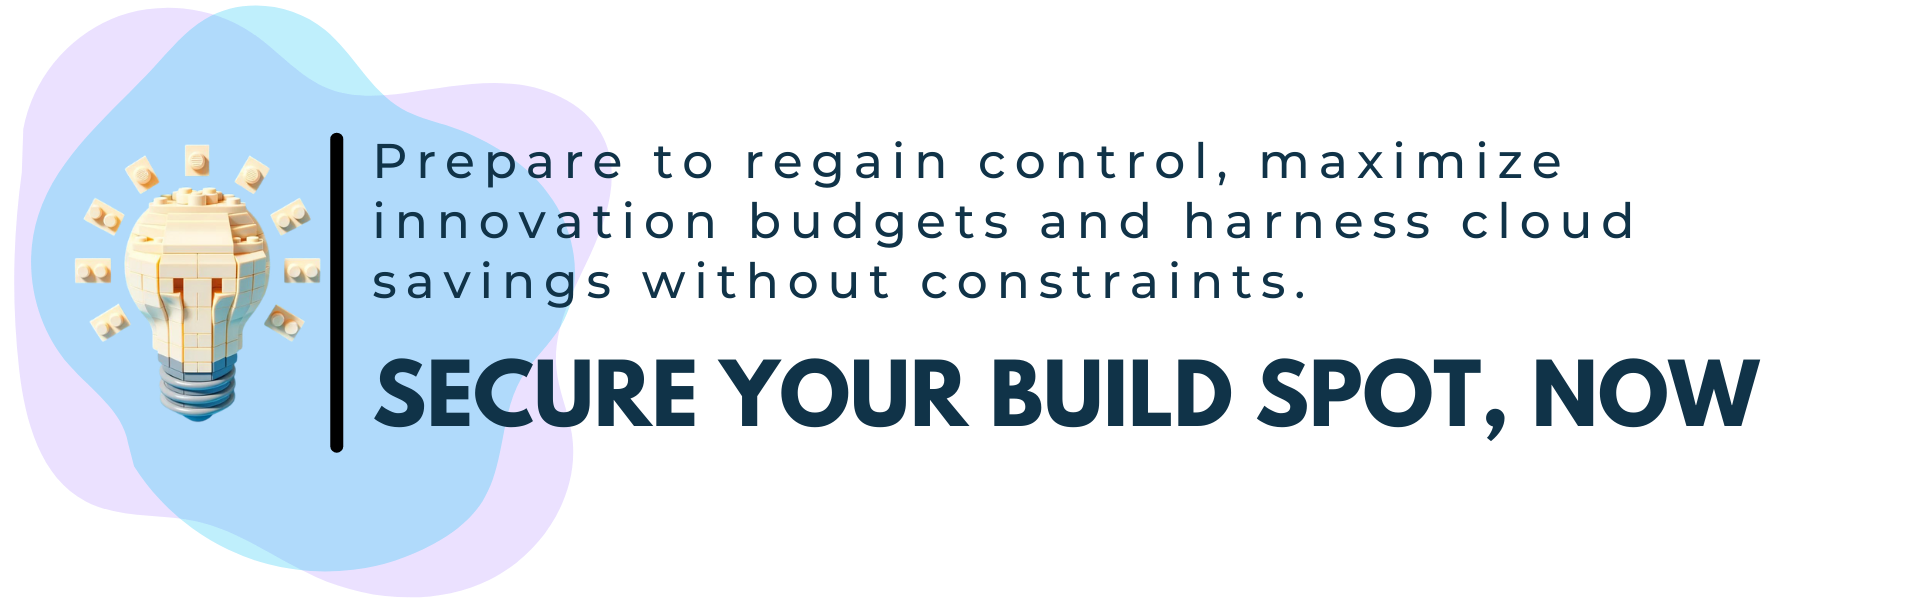 Prepare to regain control, maximize innovation budgets and harness cloud savings without constraints. Secure Your Build Spot Now Link.